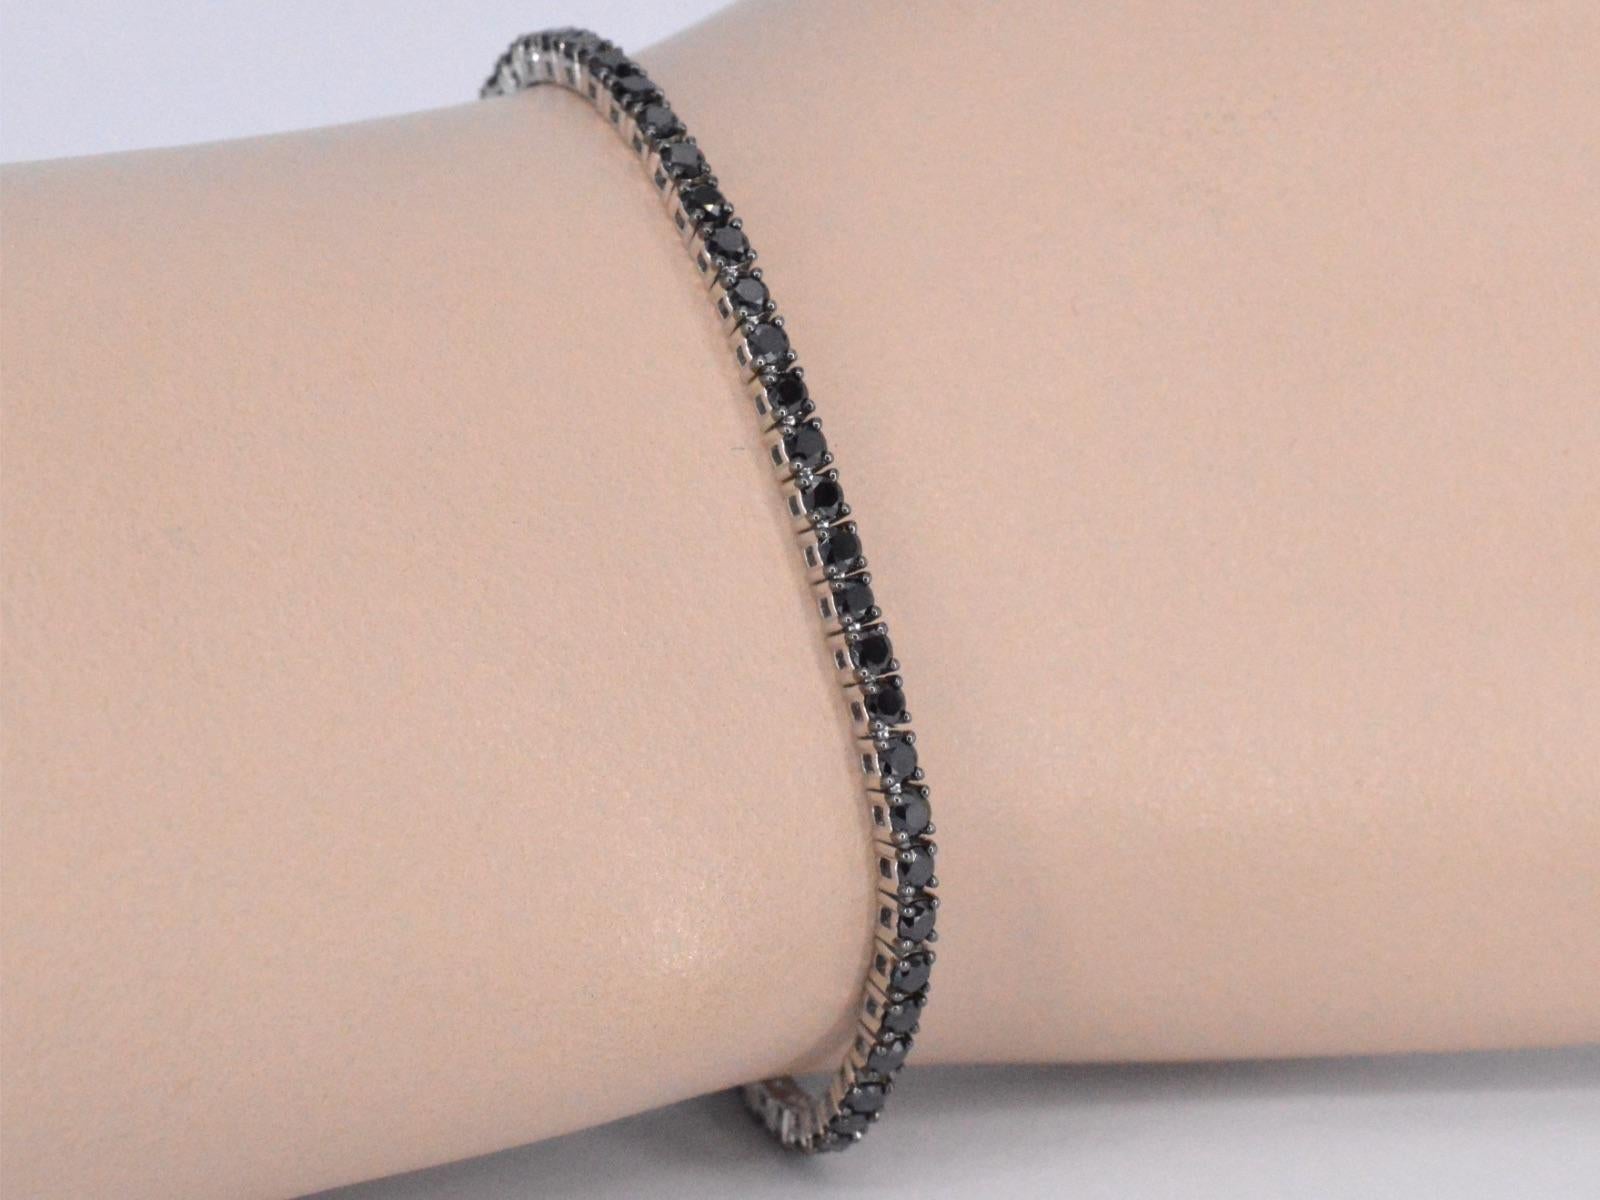 This beautiful tennis bracelet features a sleek and elegant design, crafted from high-quality white gold and set with dazzling black diamonds. The diamonds are expertly placed along the length of the bracelet, creating a continuous and sparkling